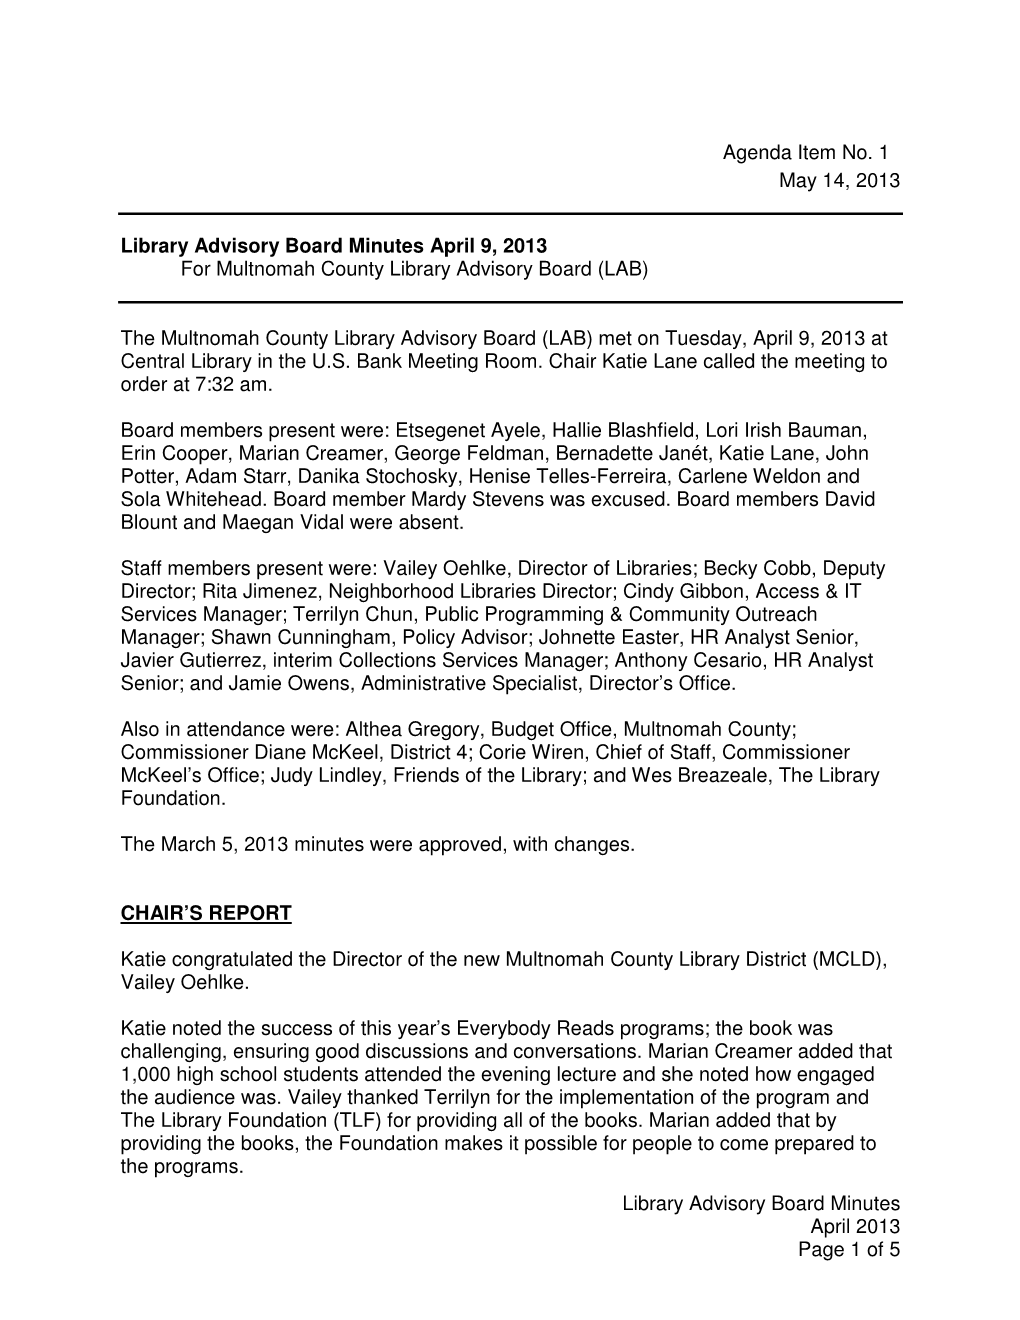 Minutes April 9, 2013 for Multnomah County Library Advisory Board (LAB)